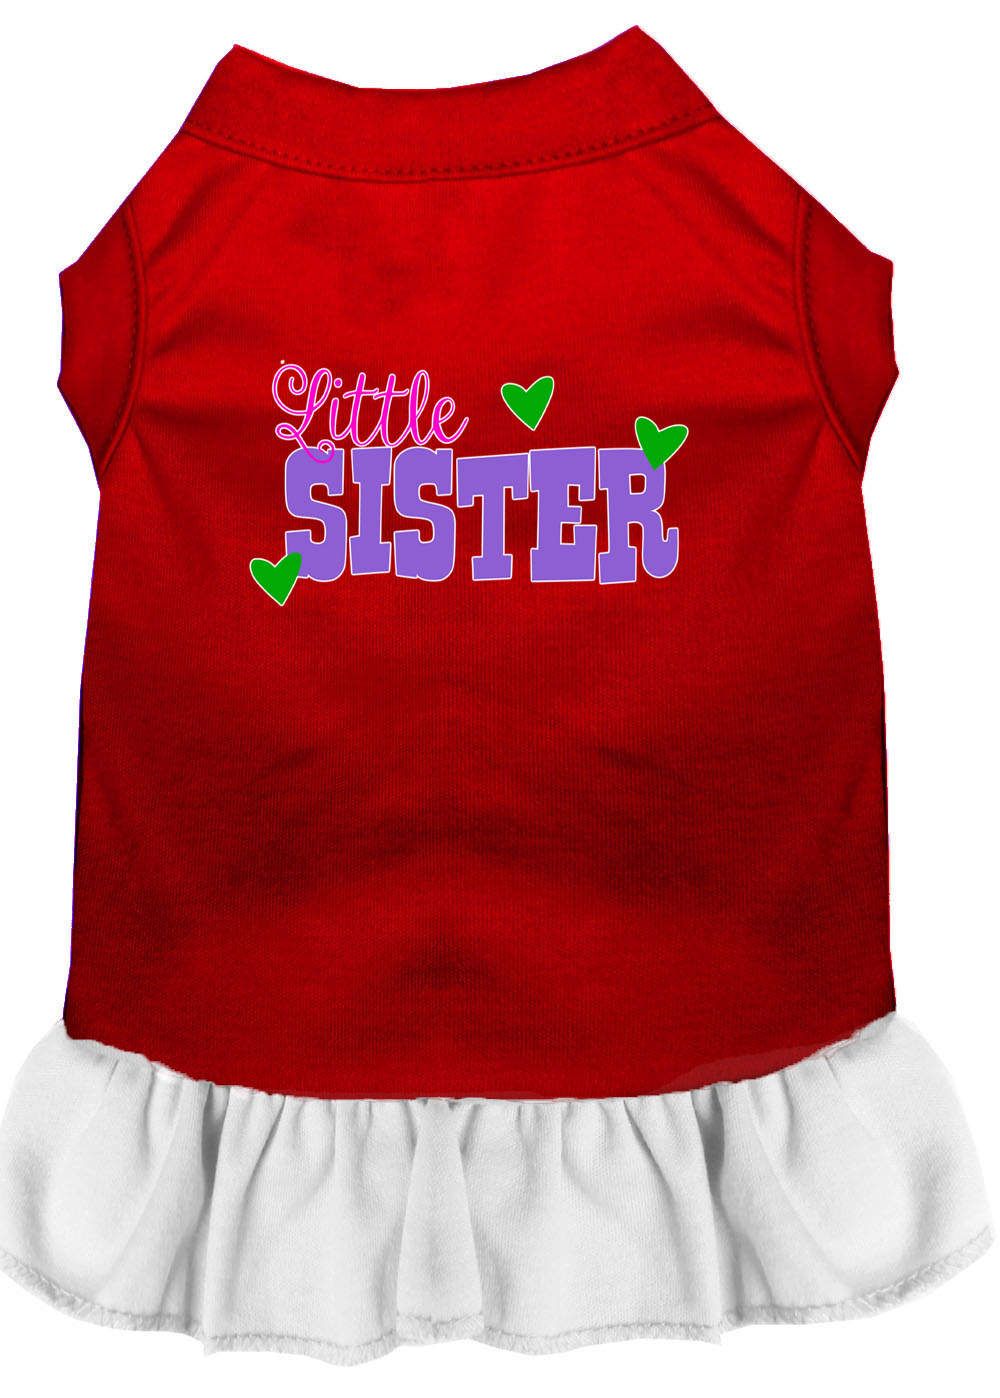 Little Sister Screen Print Dog Dress Red with White Lg